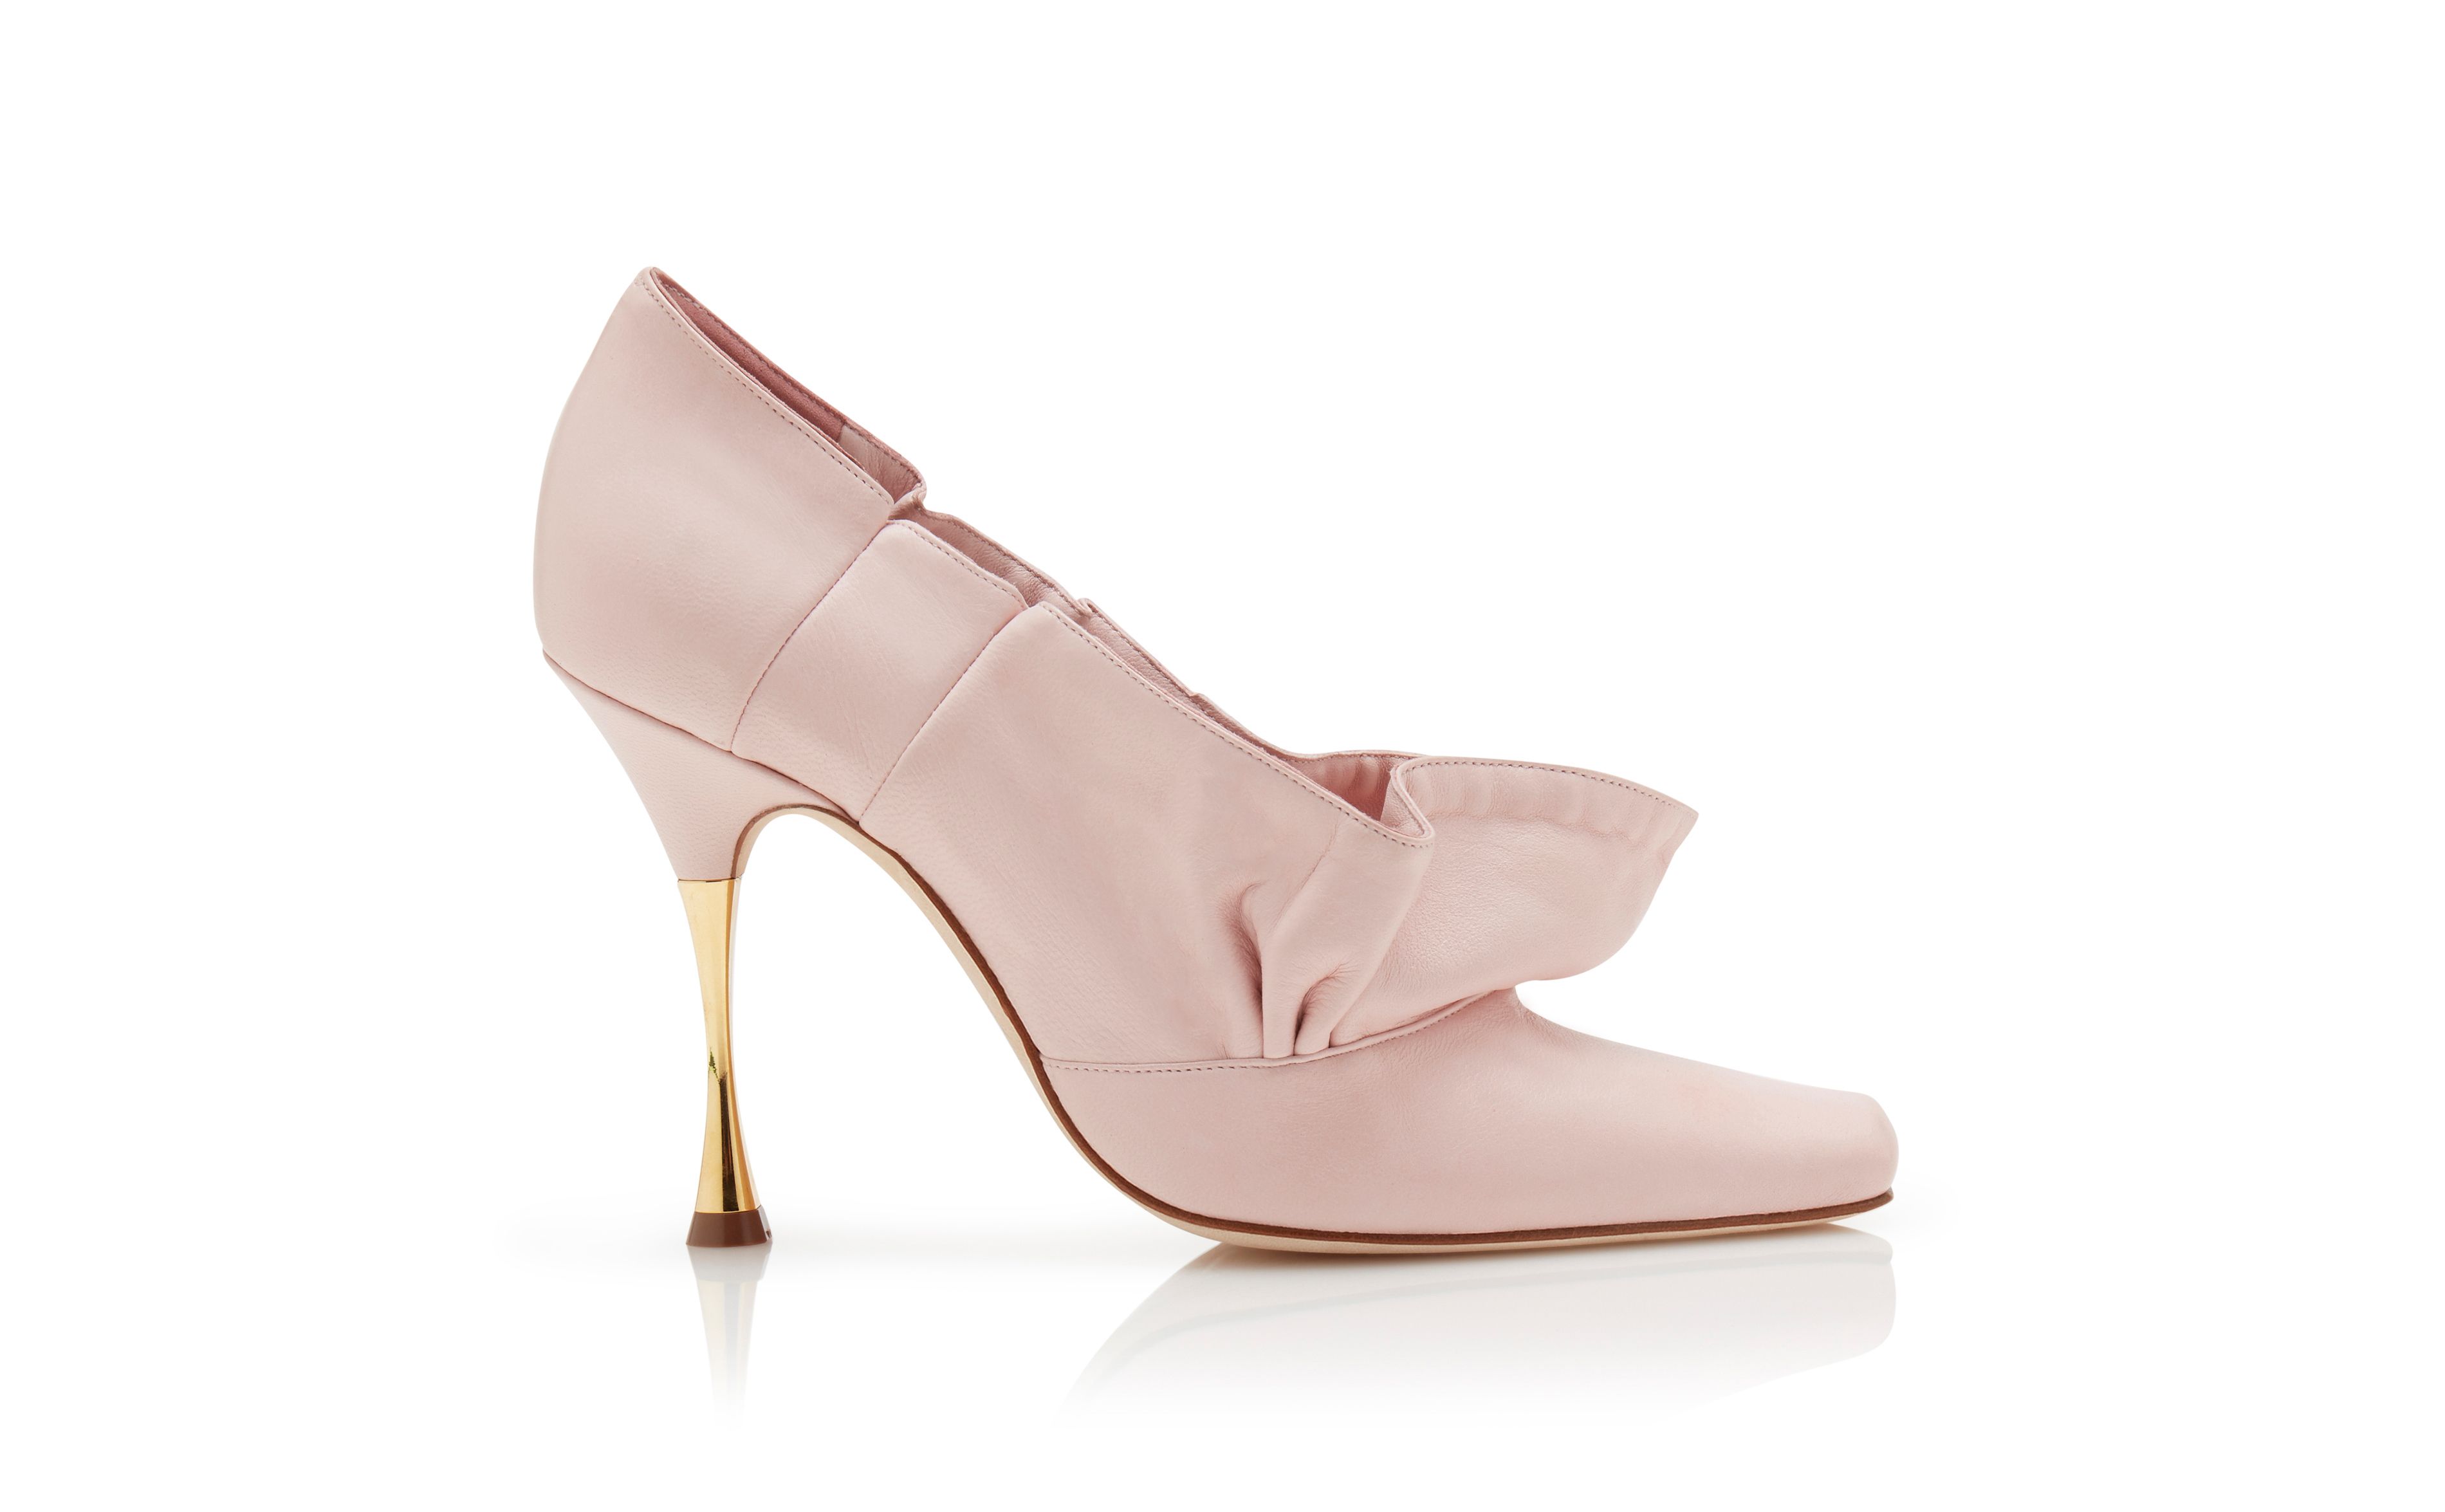 VOLARUS | Light Pink Nappa Leather Ruched Pumps | Manolo Blahnik